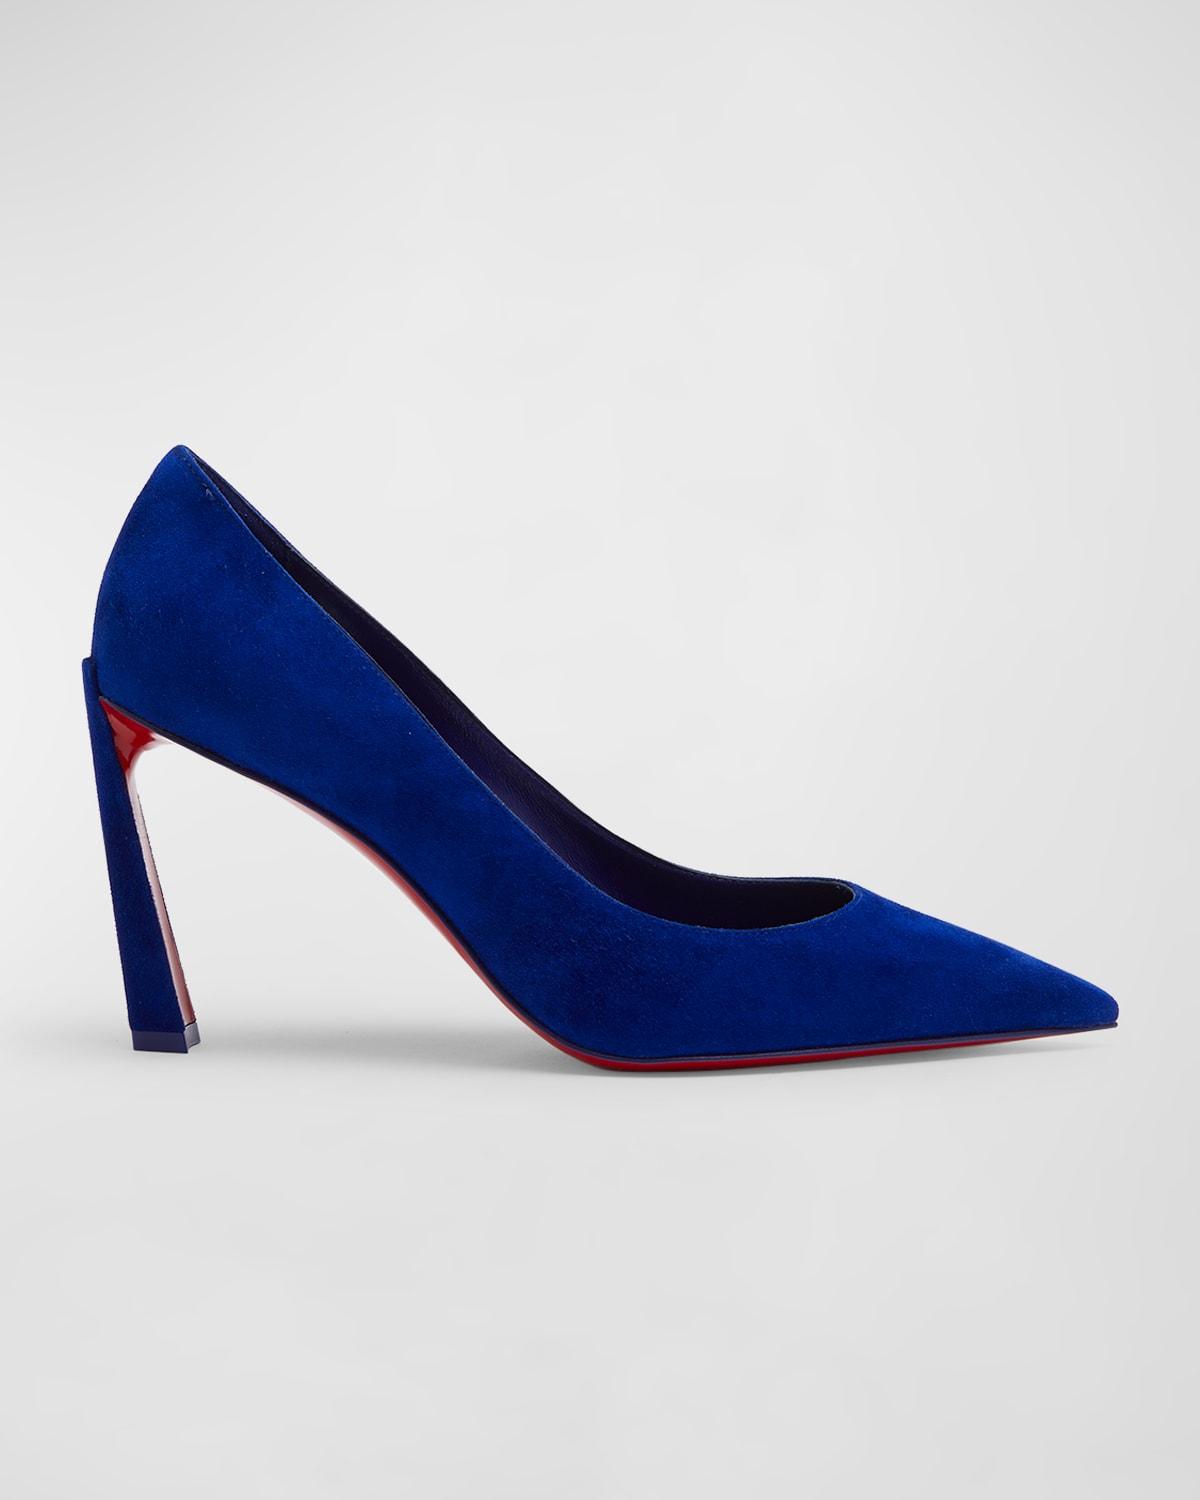 Christian Louboutin Condora Suede Red Sole Pumps in Blue | Lyst